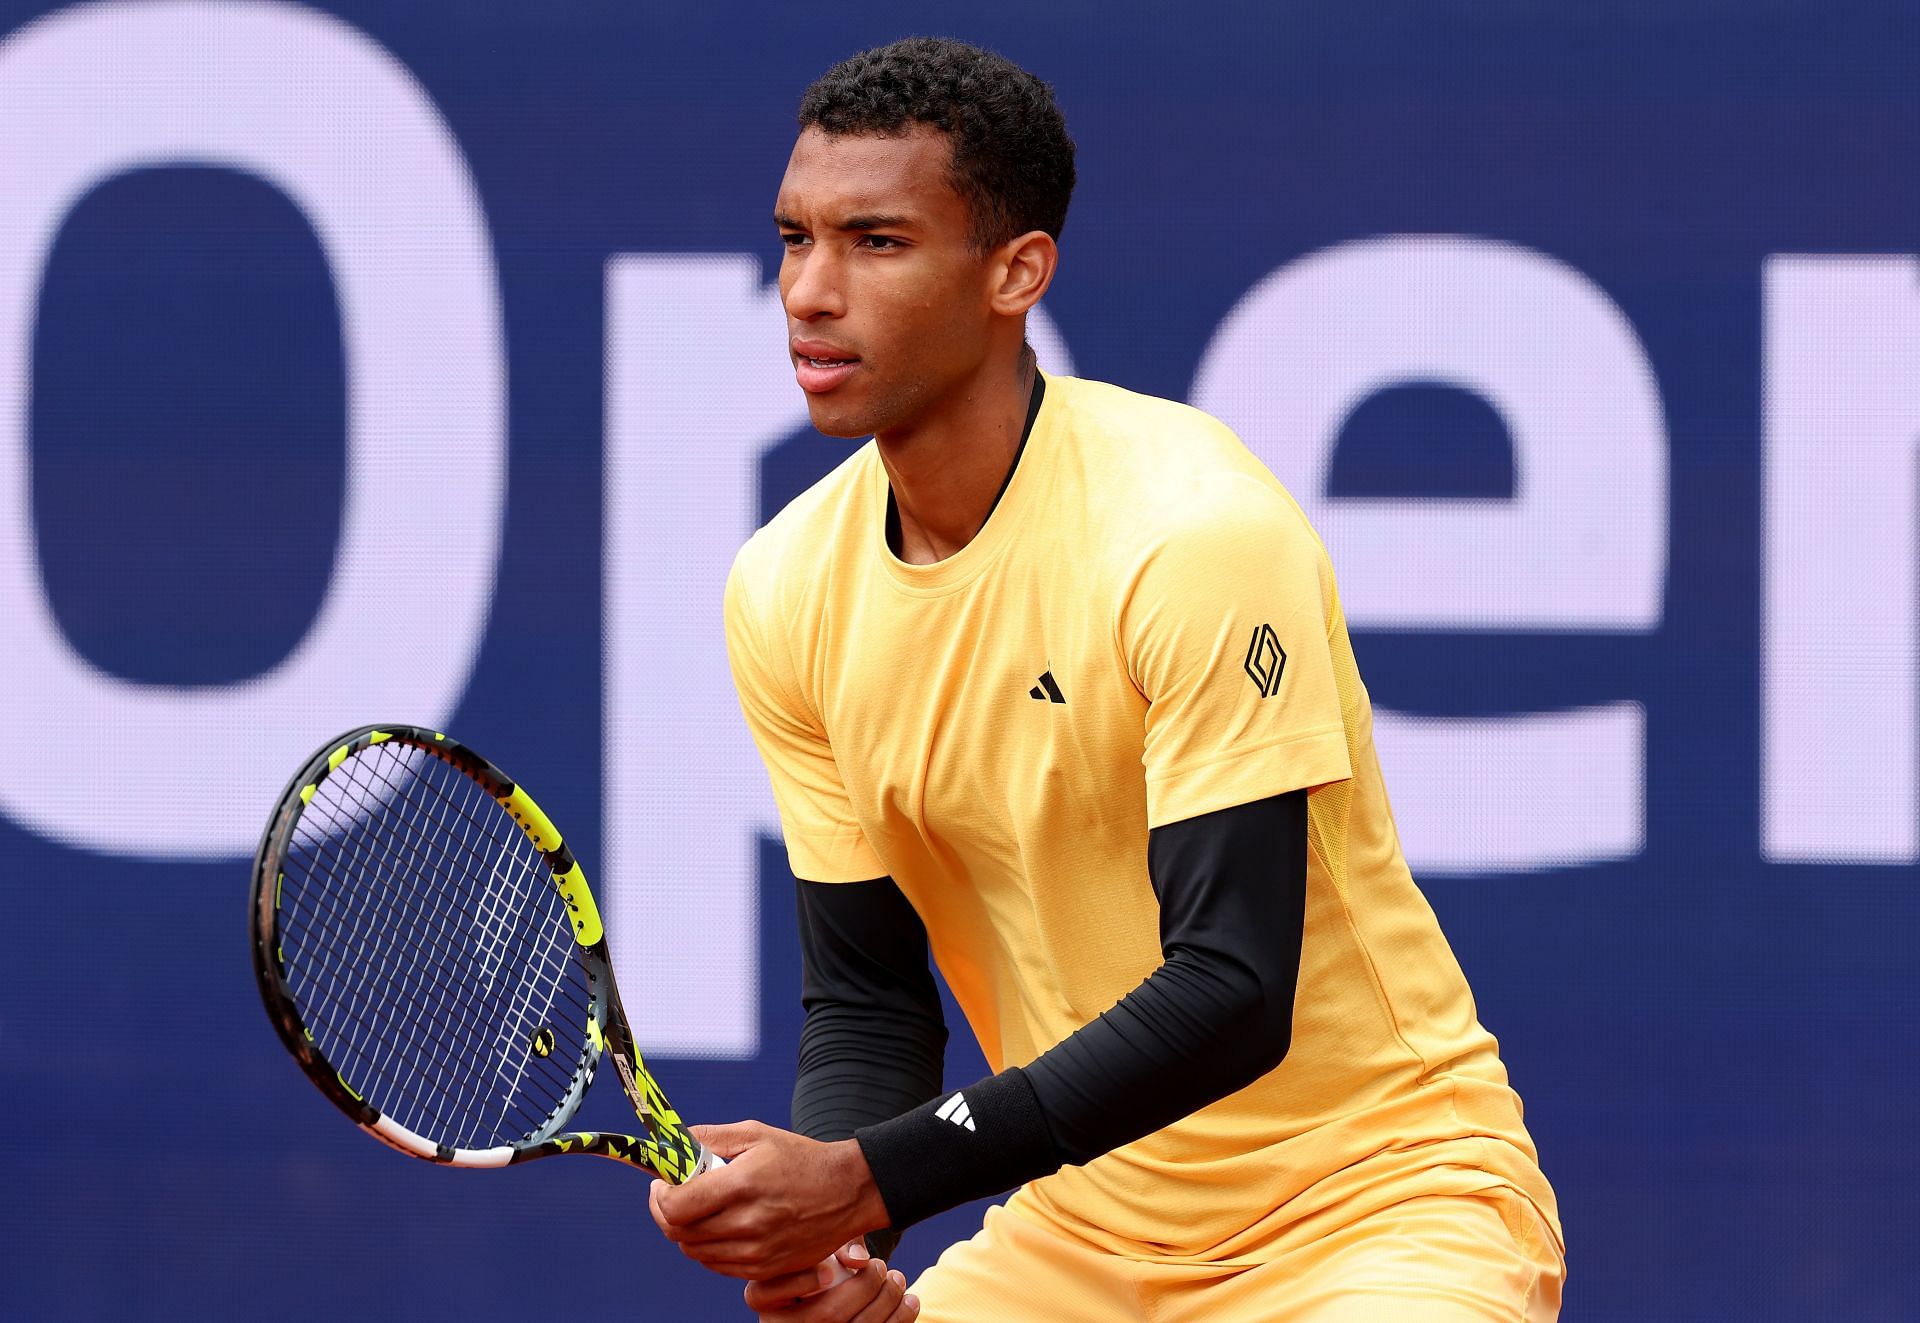 Auger-Aliassime at the BMW Open - Day 4